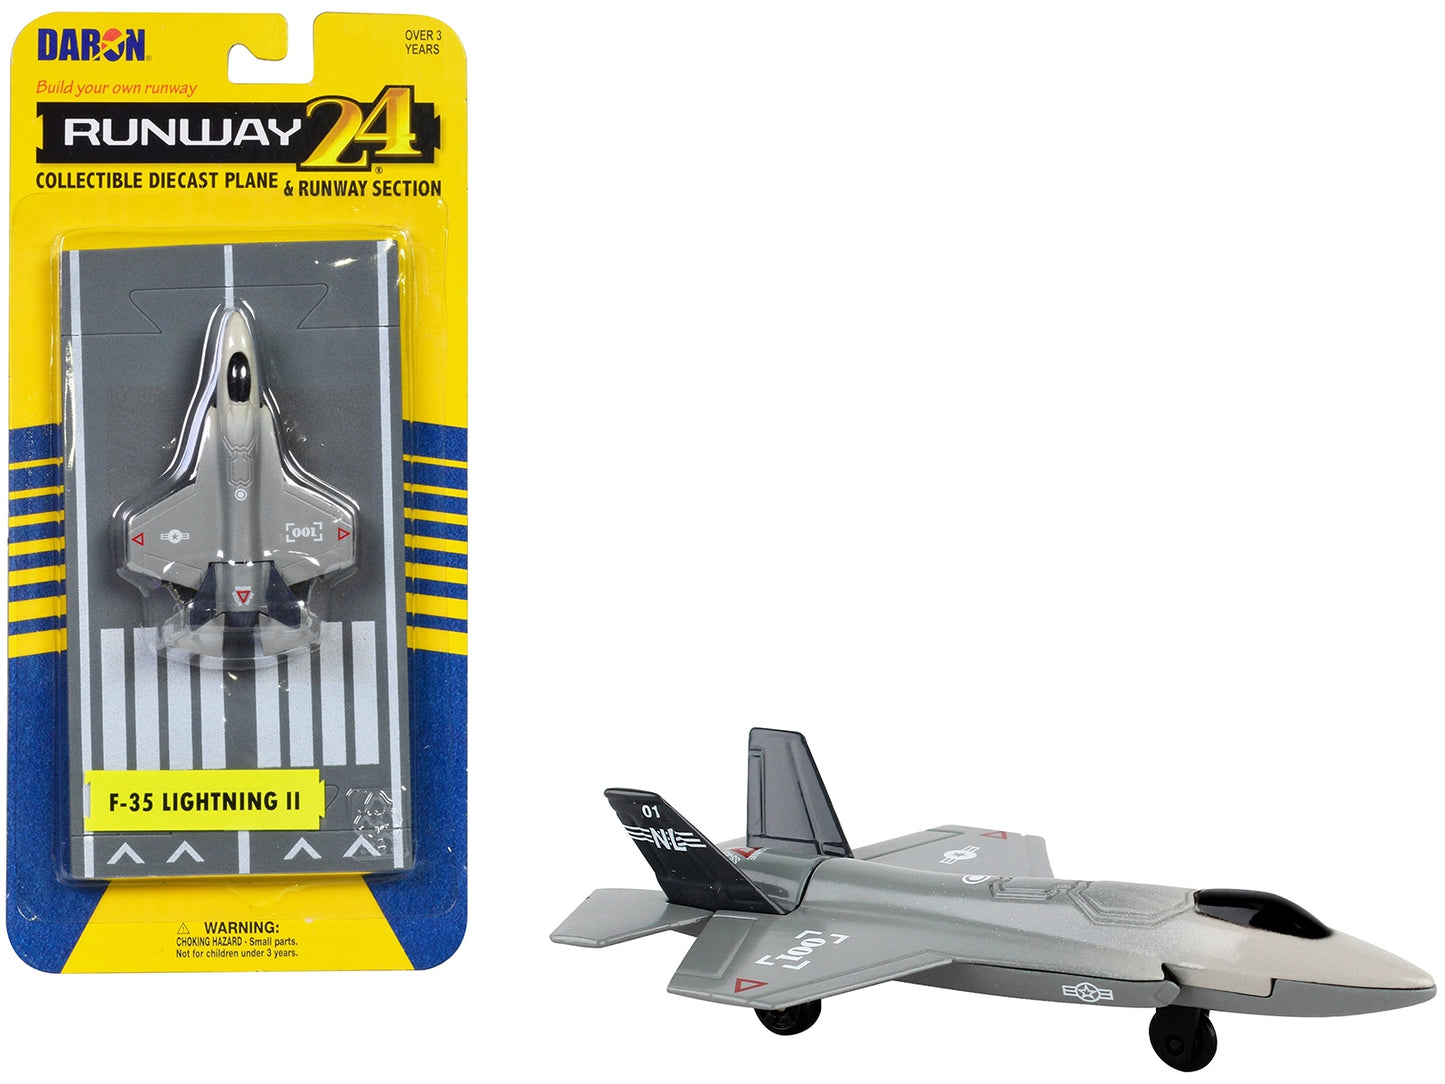 Lockheed Martin F-35 Lightning II Aircraft Gray "Joint Strike Fighter" with Runway Section Diecast Model Airplane by Runway24